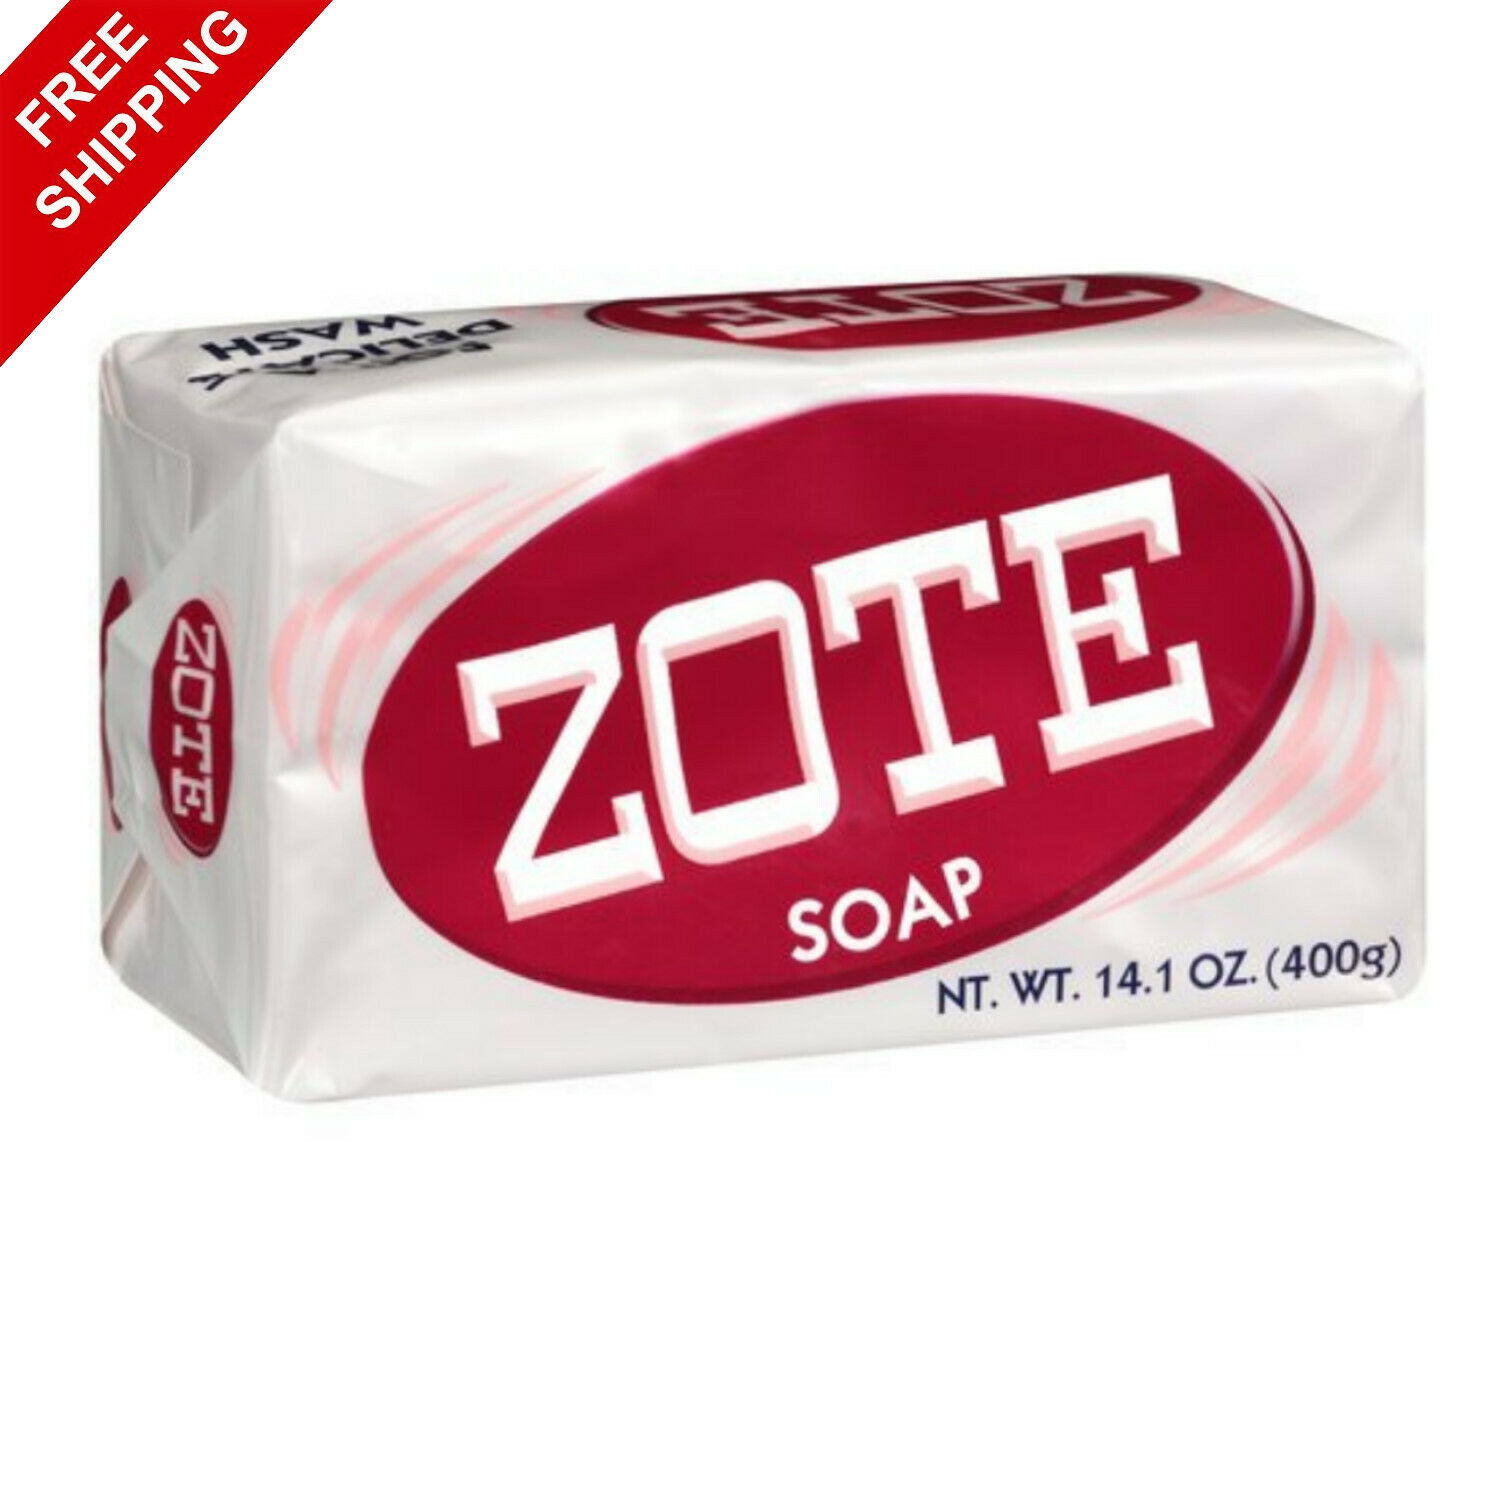 Zote Laundry Bar Soap Pink - 14.1oz Free shipping + Best price - STOCK UP!